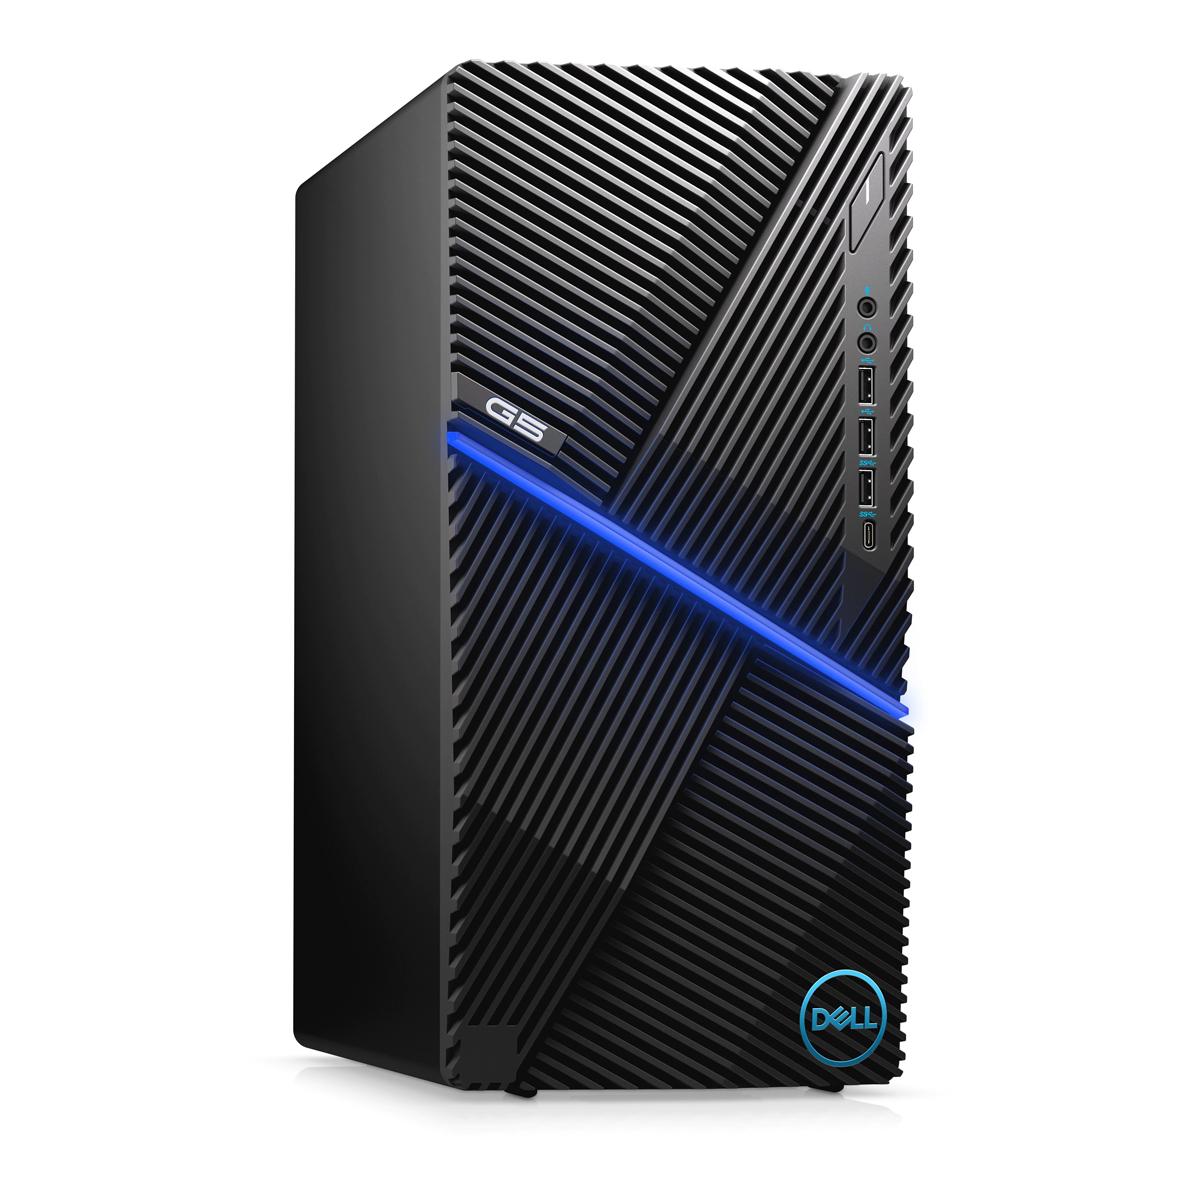 Dell G5 i5 8GB 256GB GTX 1650 Gaming Desktop Computer for $579.99 Shipped